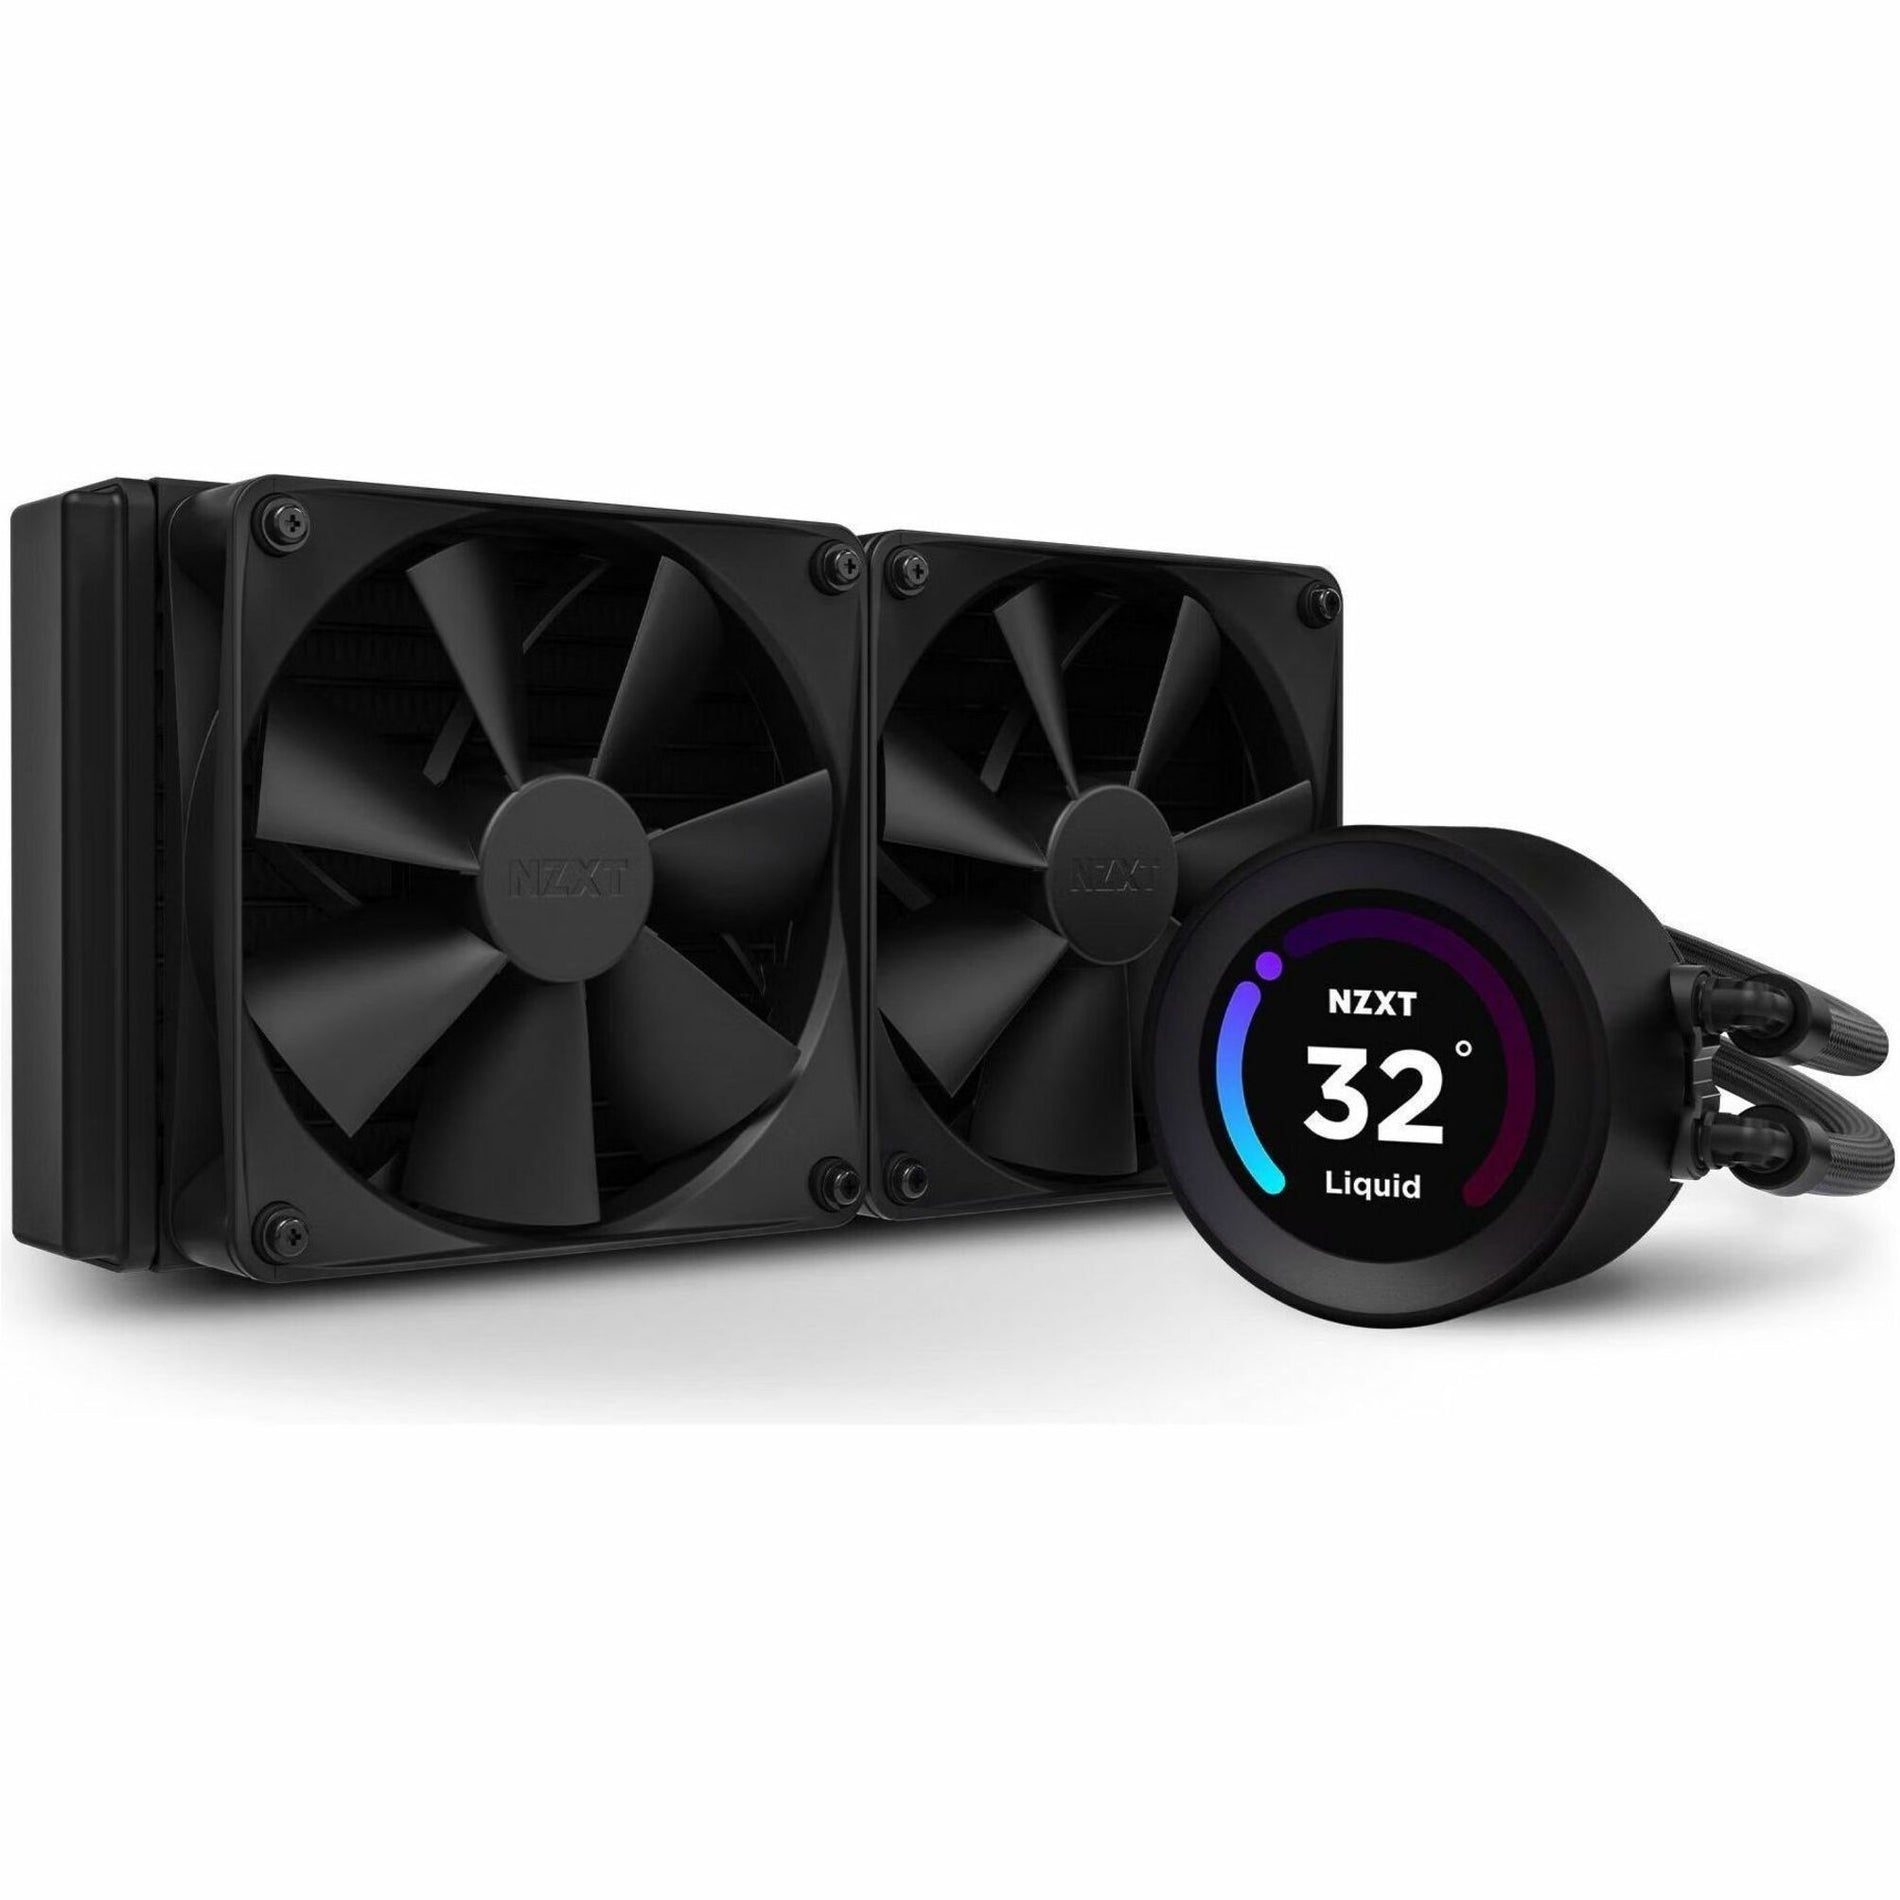 NZXT RL-KN24E-B1 Kraken Elite 240 240mm AIO Liquid Cooler with LCD Display Powerful Cooling Solution for Gaming PCs